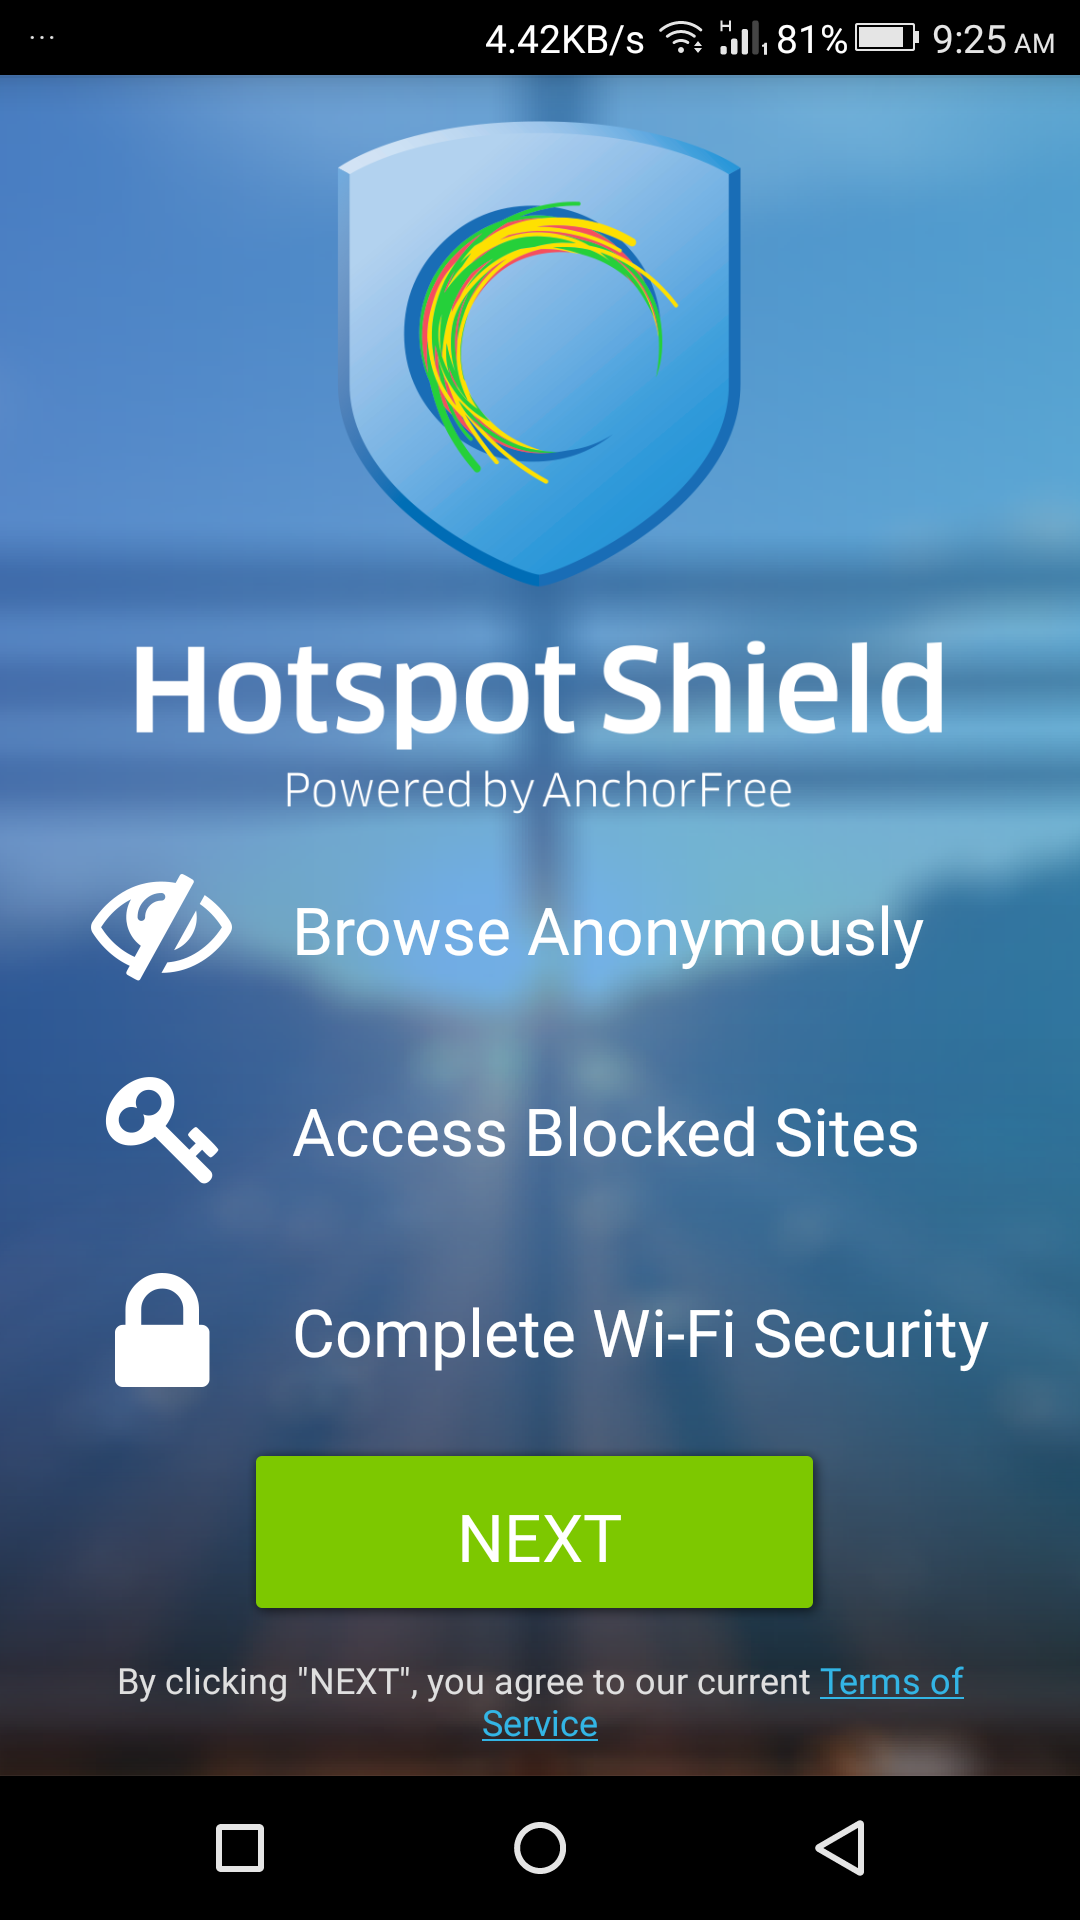 Download The Hotspot Shield For Android